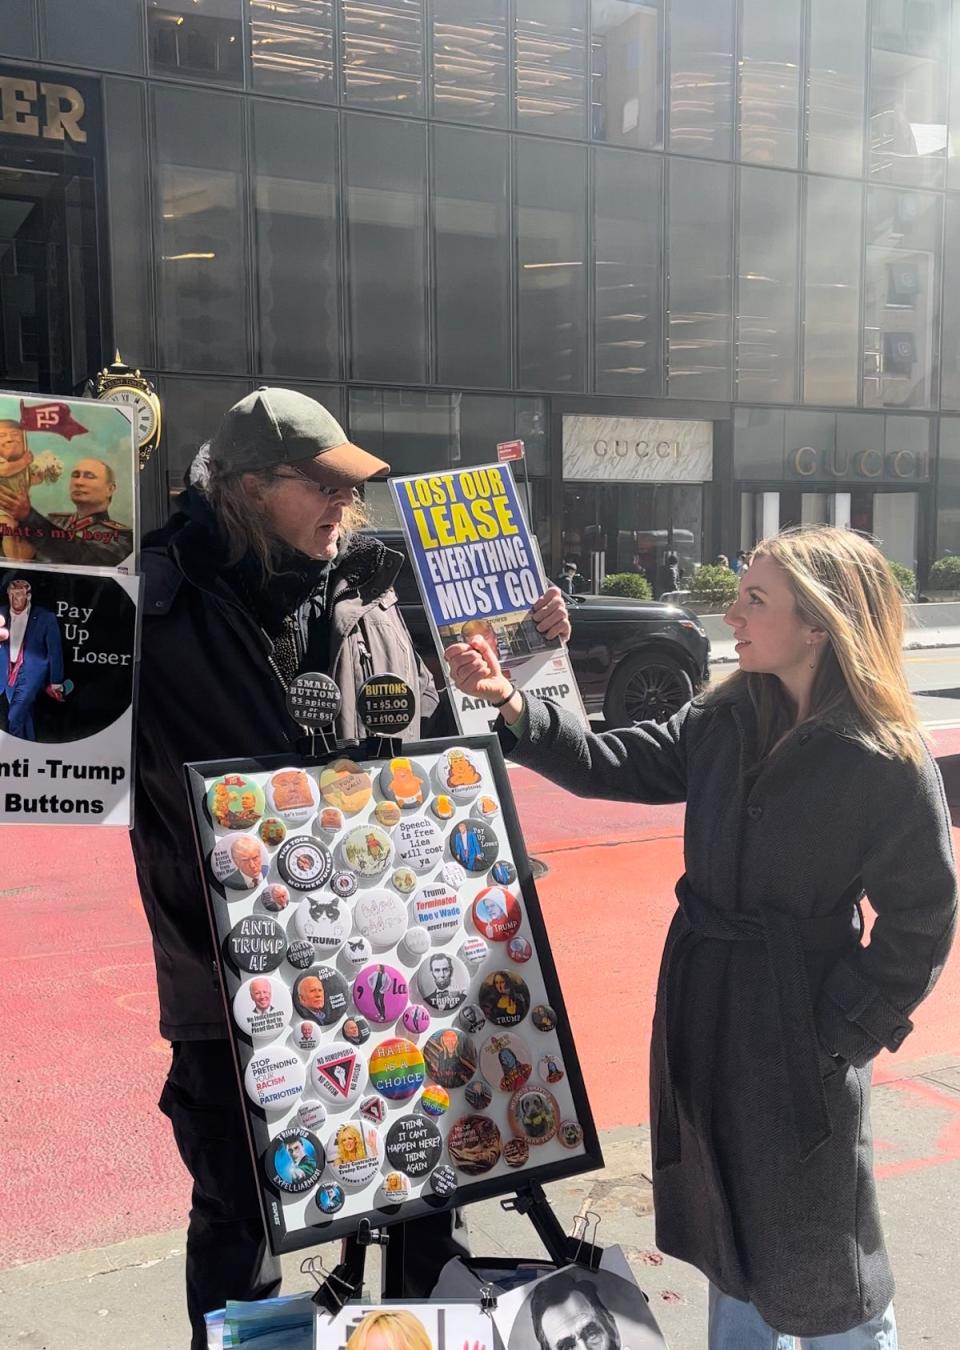 The Independent speaks to an anti-Trump button seller outside of Trump Tower (The Independent)